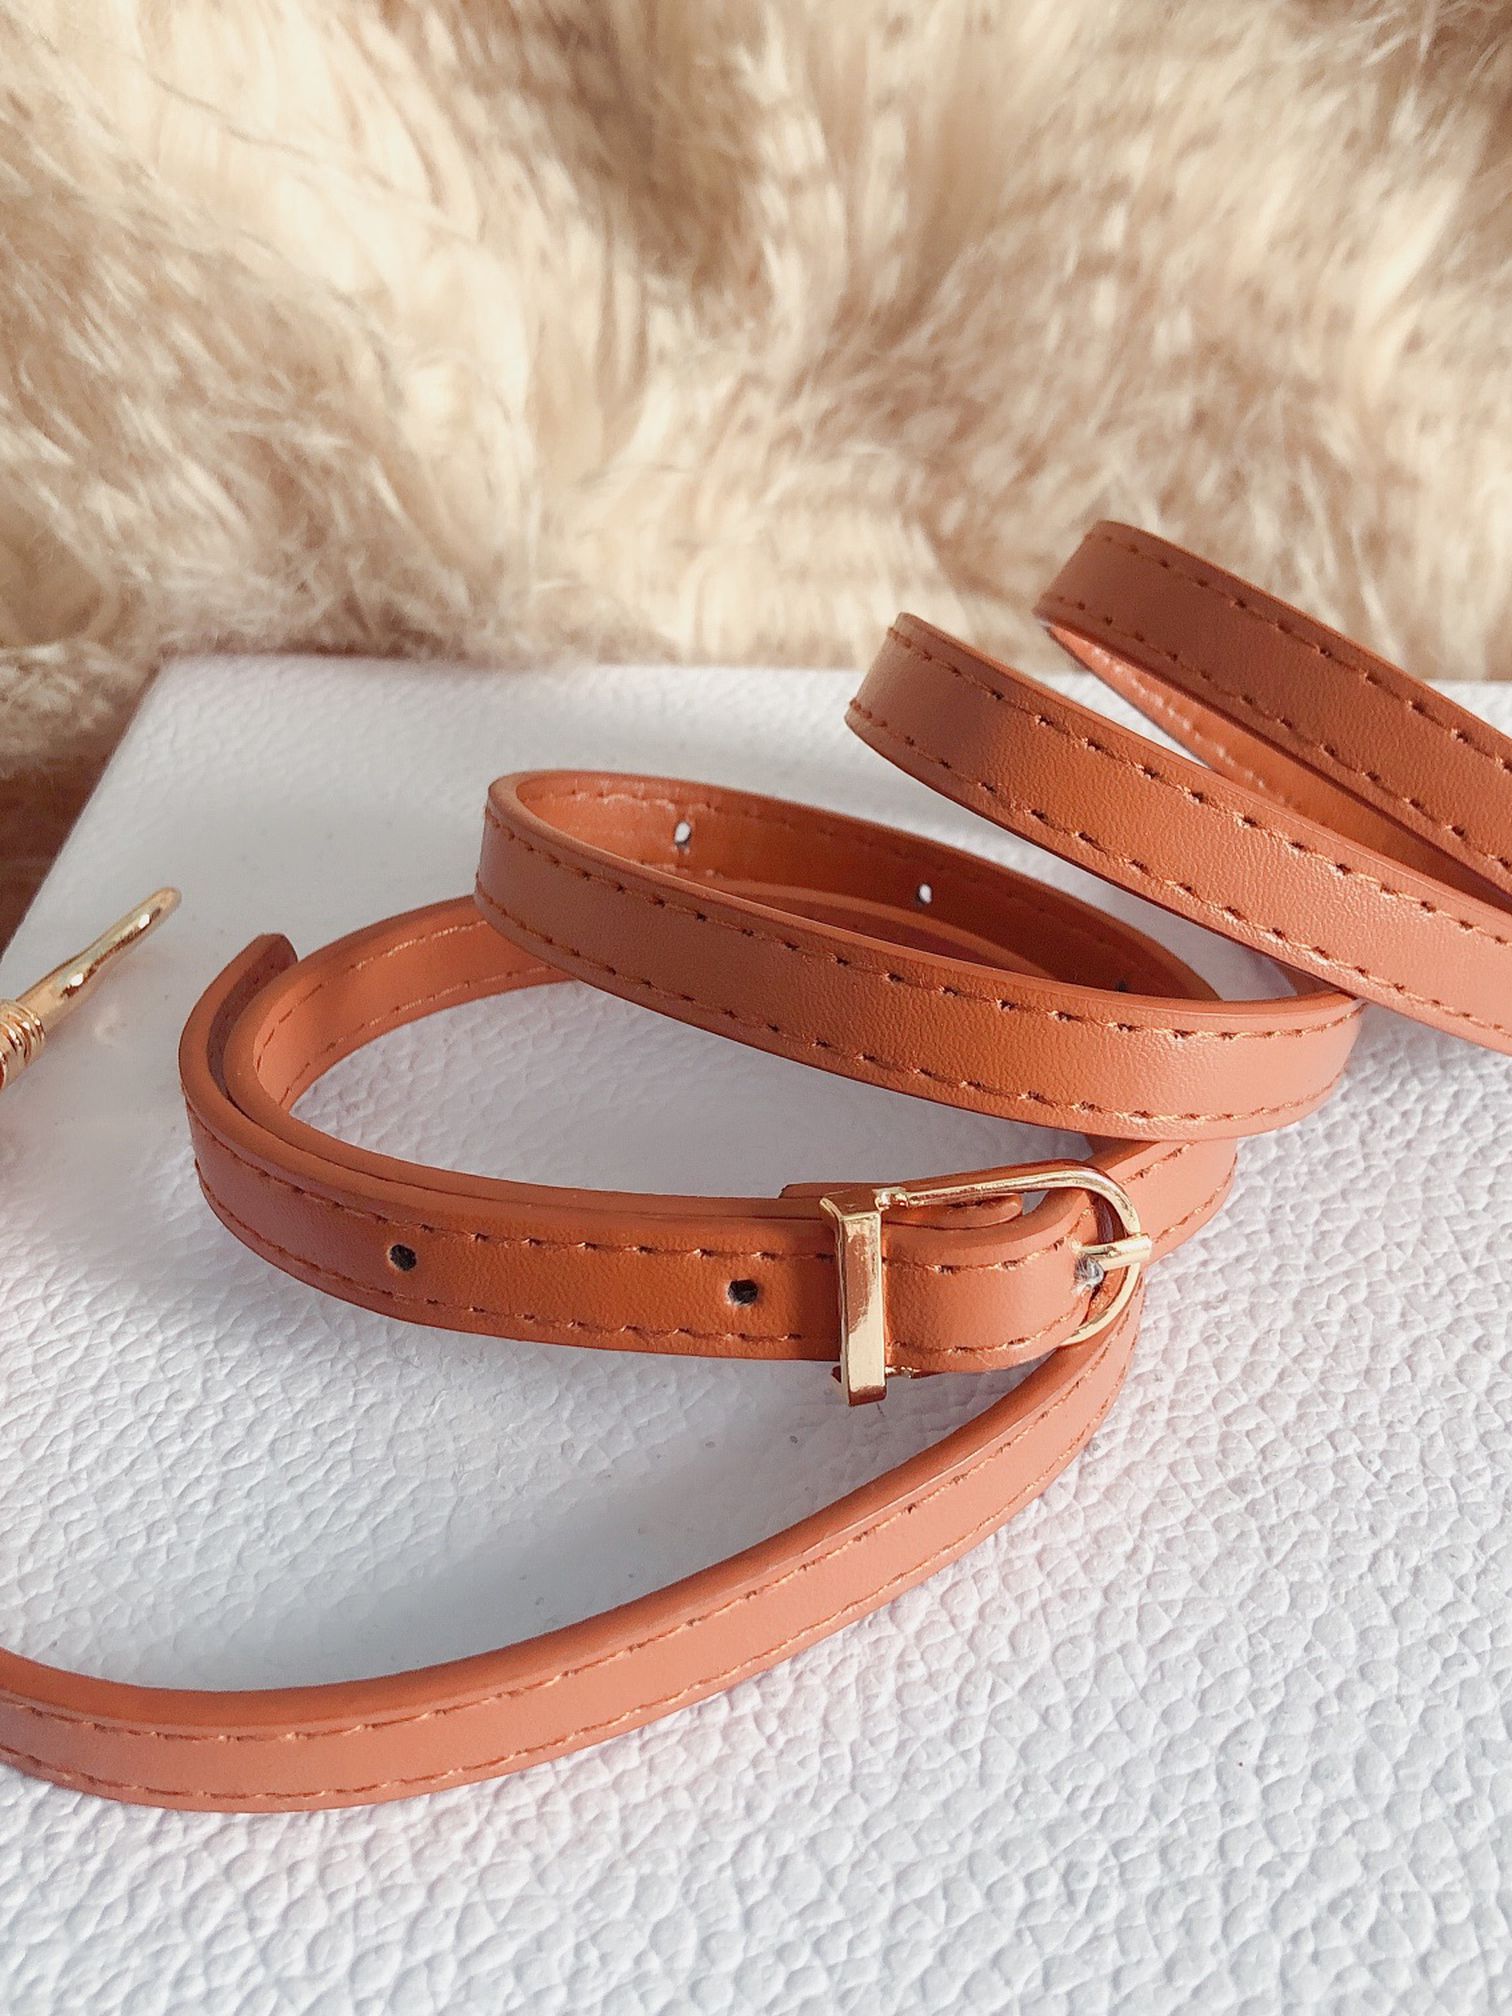 Tan Strap Replacement for Sale in Brooklyn, NY - OfferUp